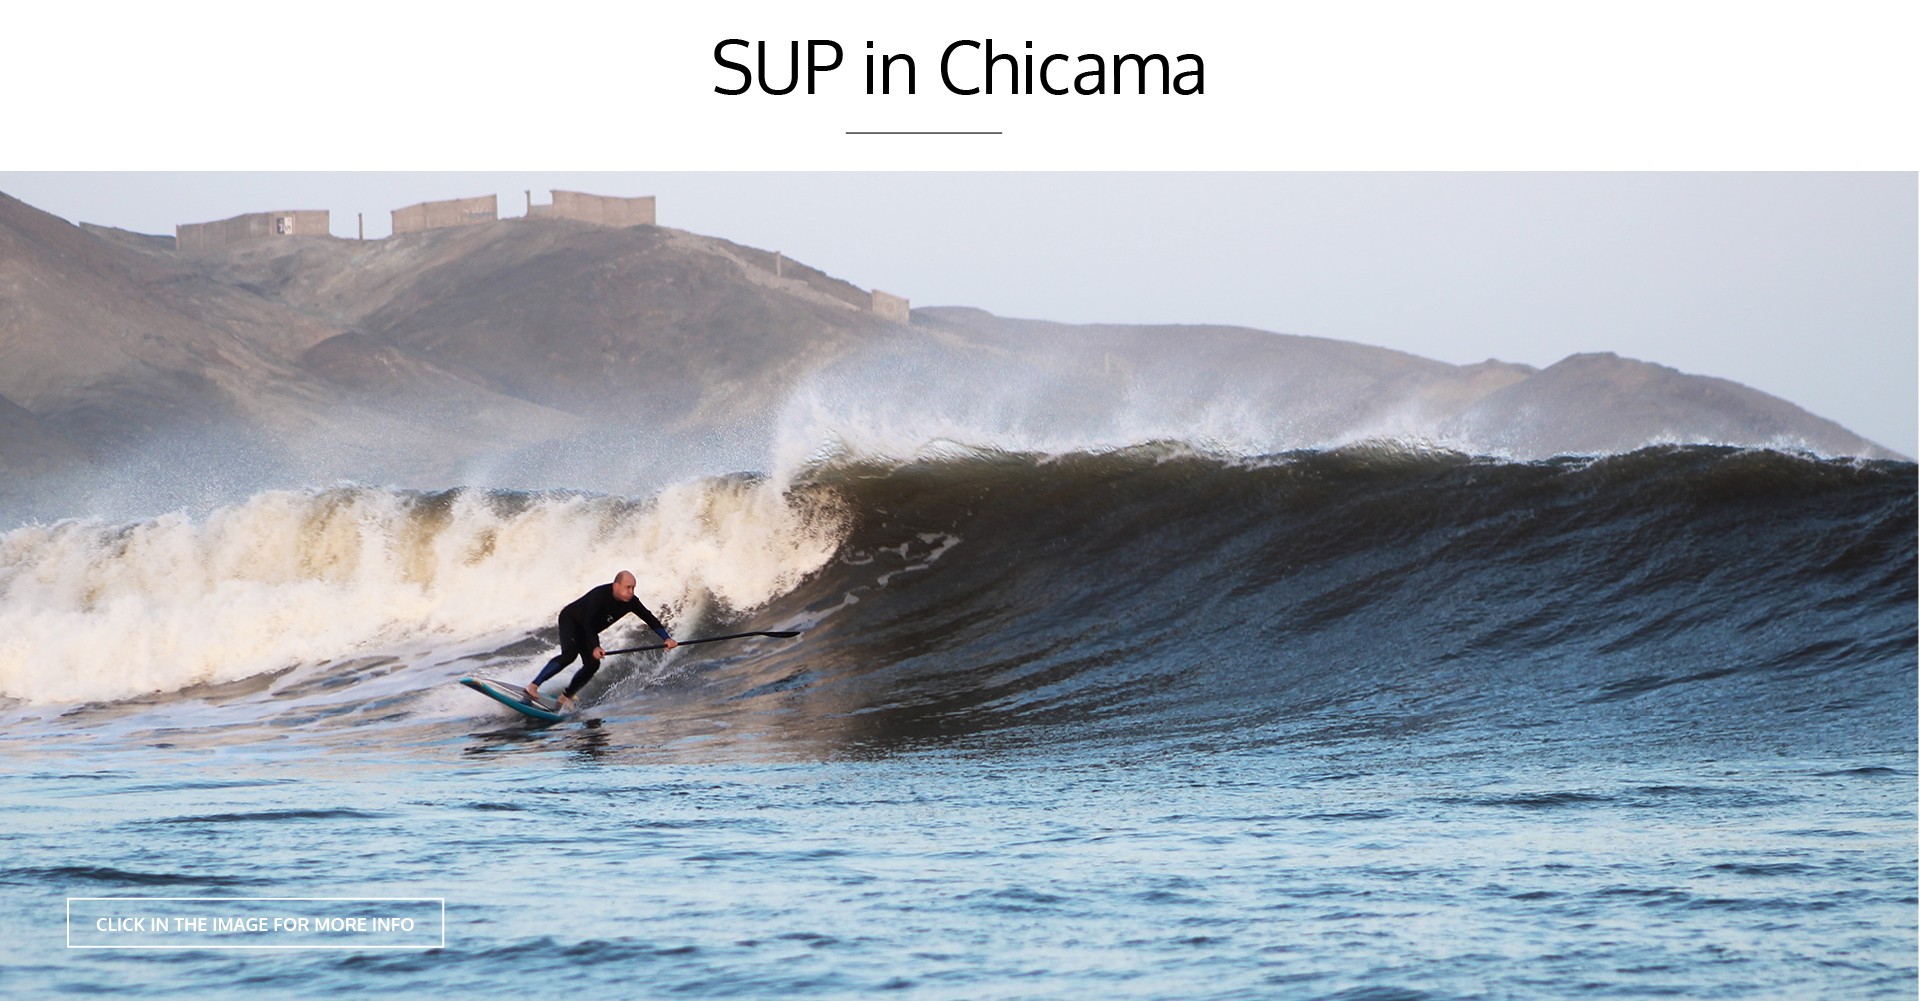 SUP IN CHICAMA